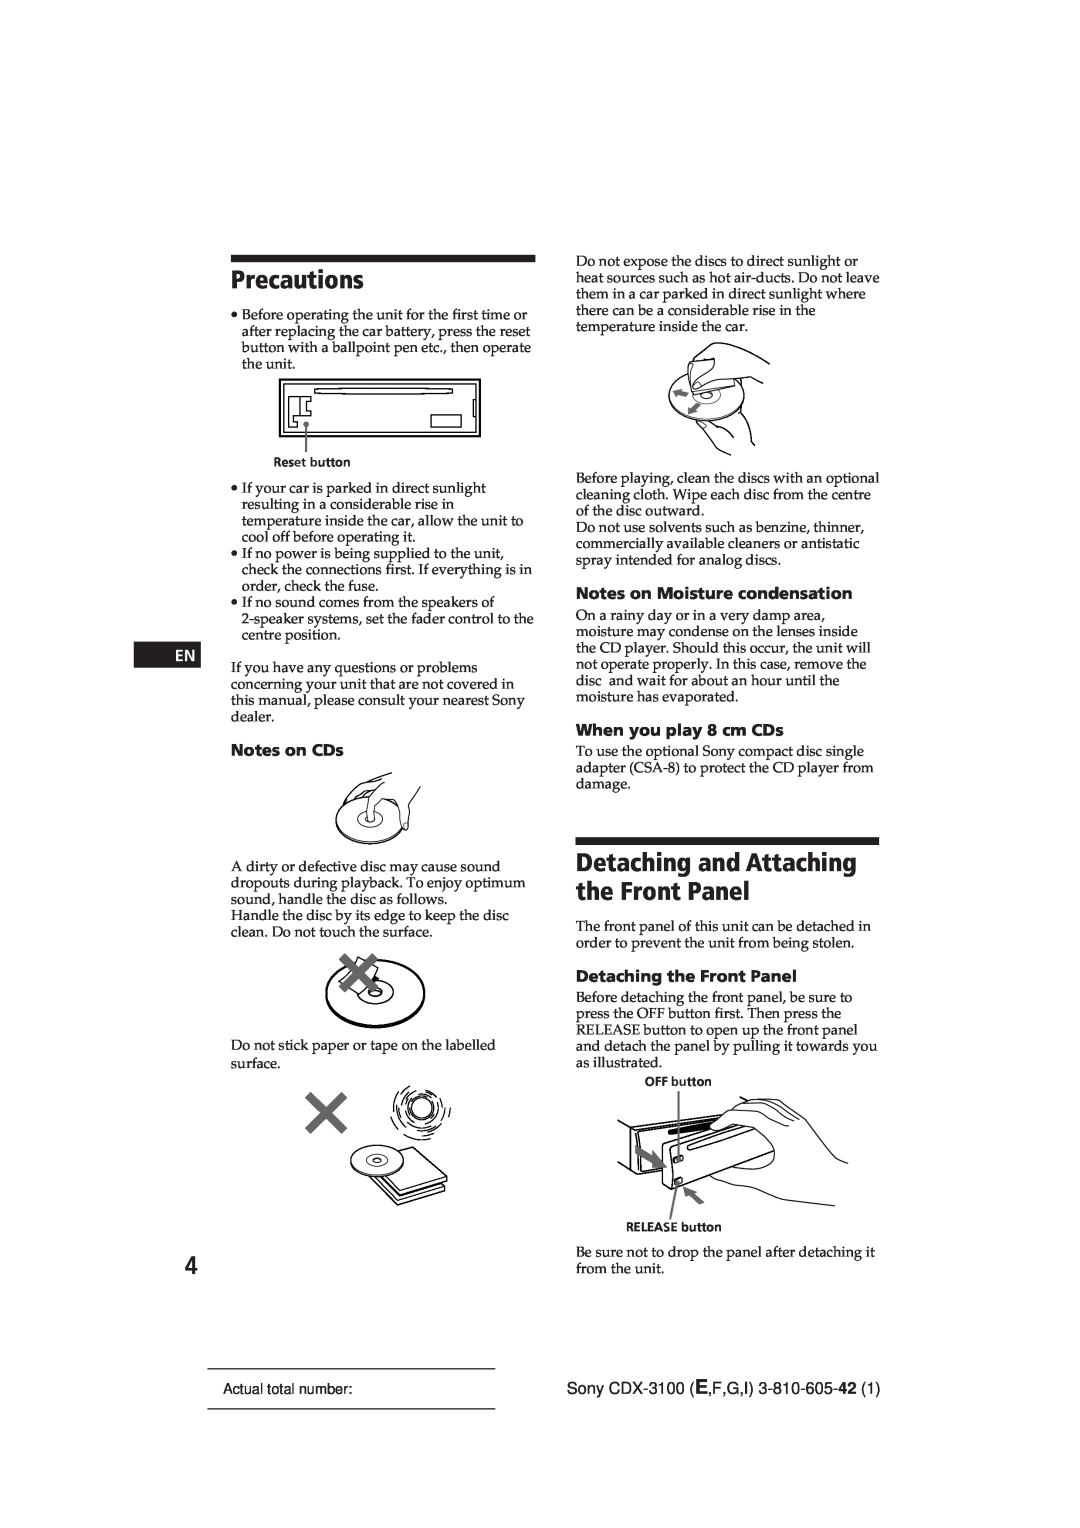 Sony CDX-3100 manual Precautions, Detaching and Attaching the Front Panel, Notes on CDs, Notes on Moisture condensation 